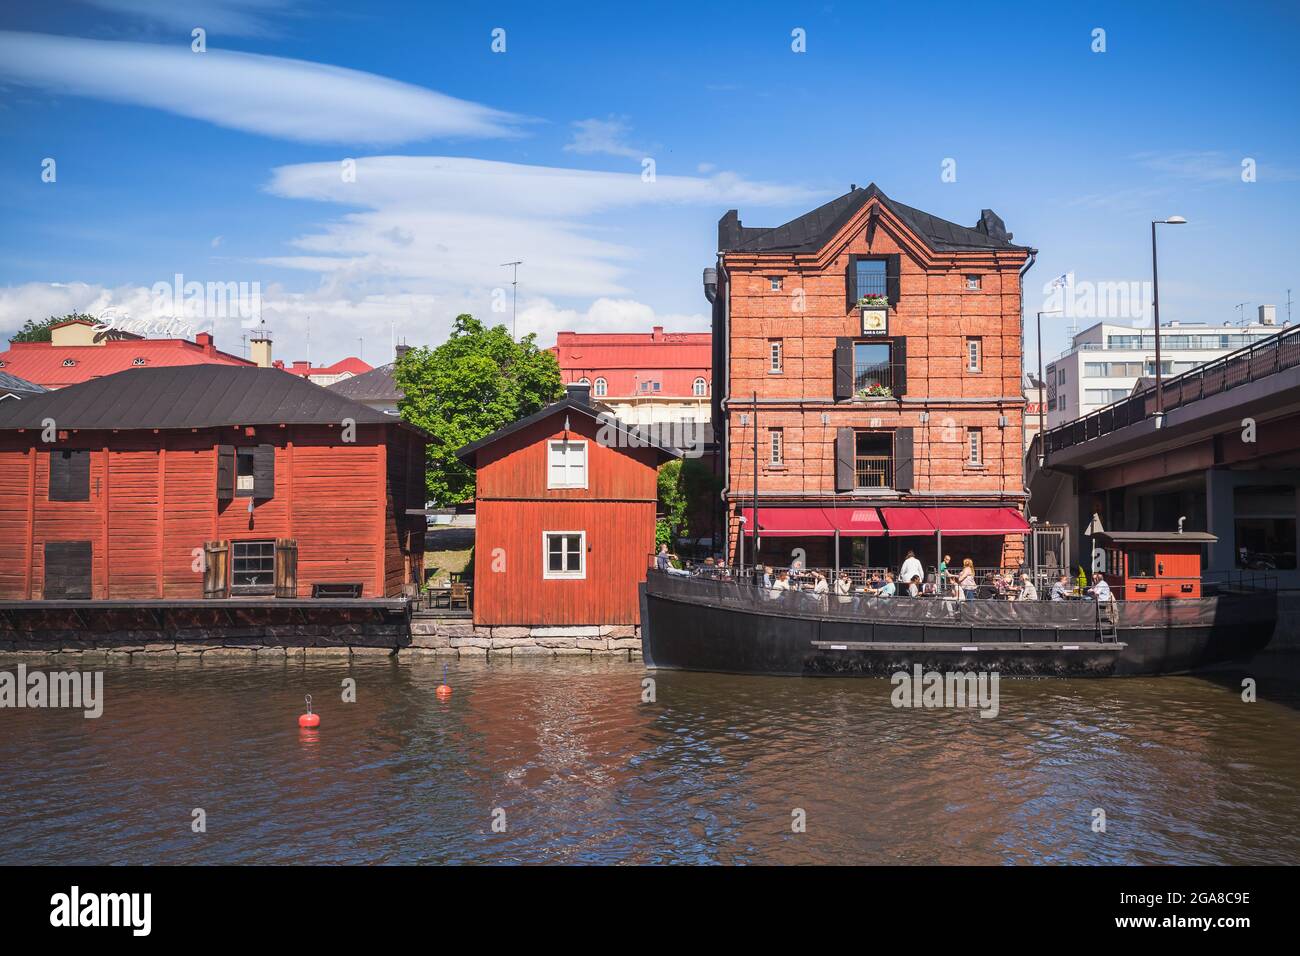 Porvoo, Finland - June 12, 2015: Old red wooden houses on a river coast in historical Finnish town. Ordinary people rest in an outdoor restaraunt terr Stock Photo